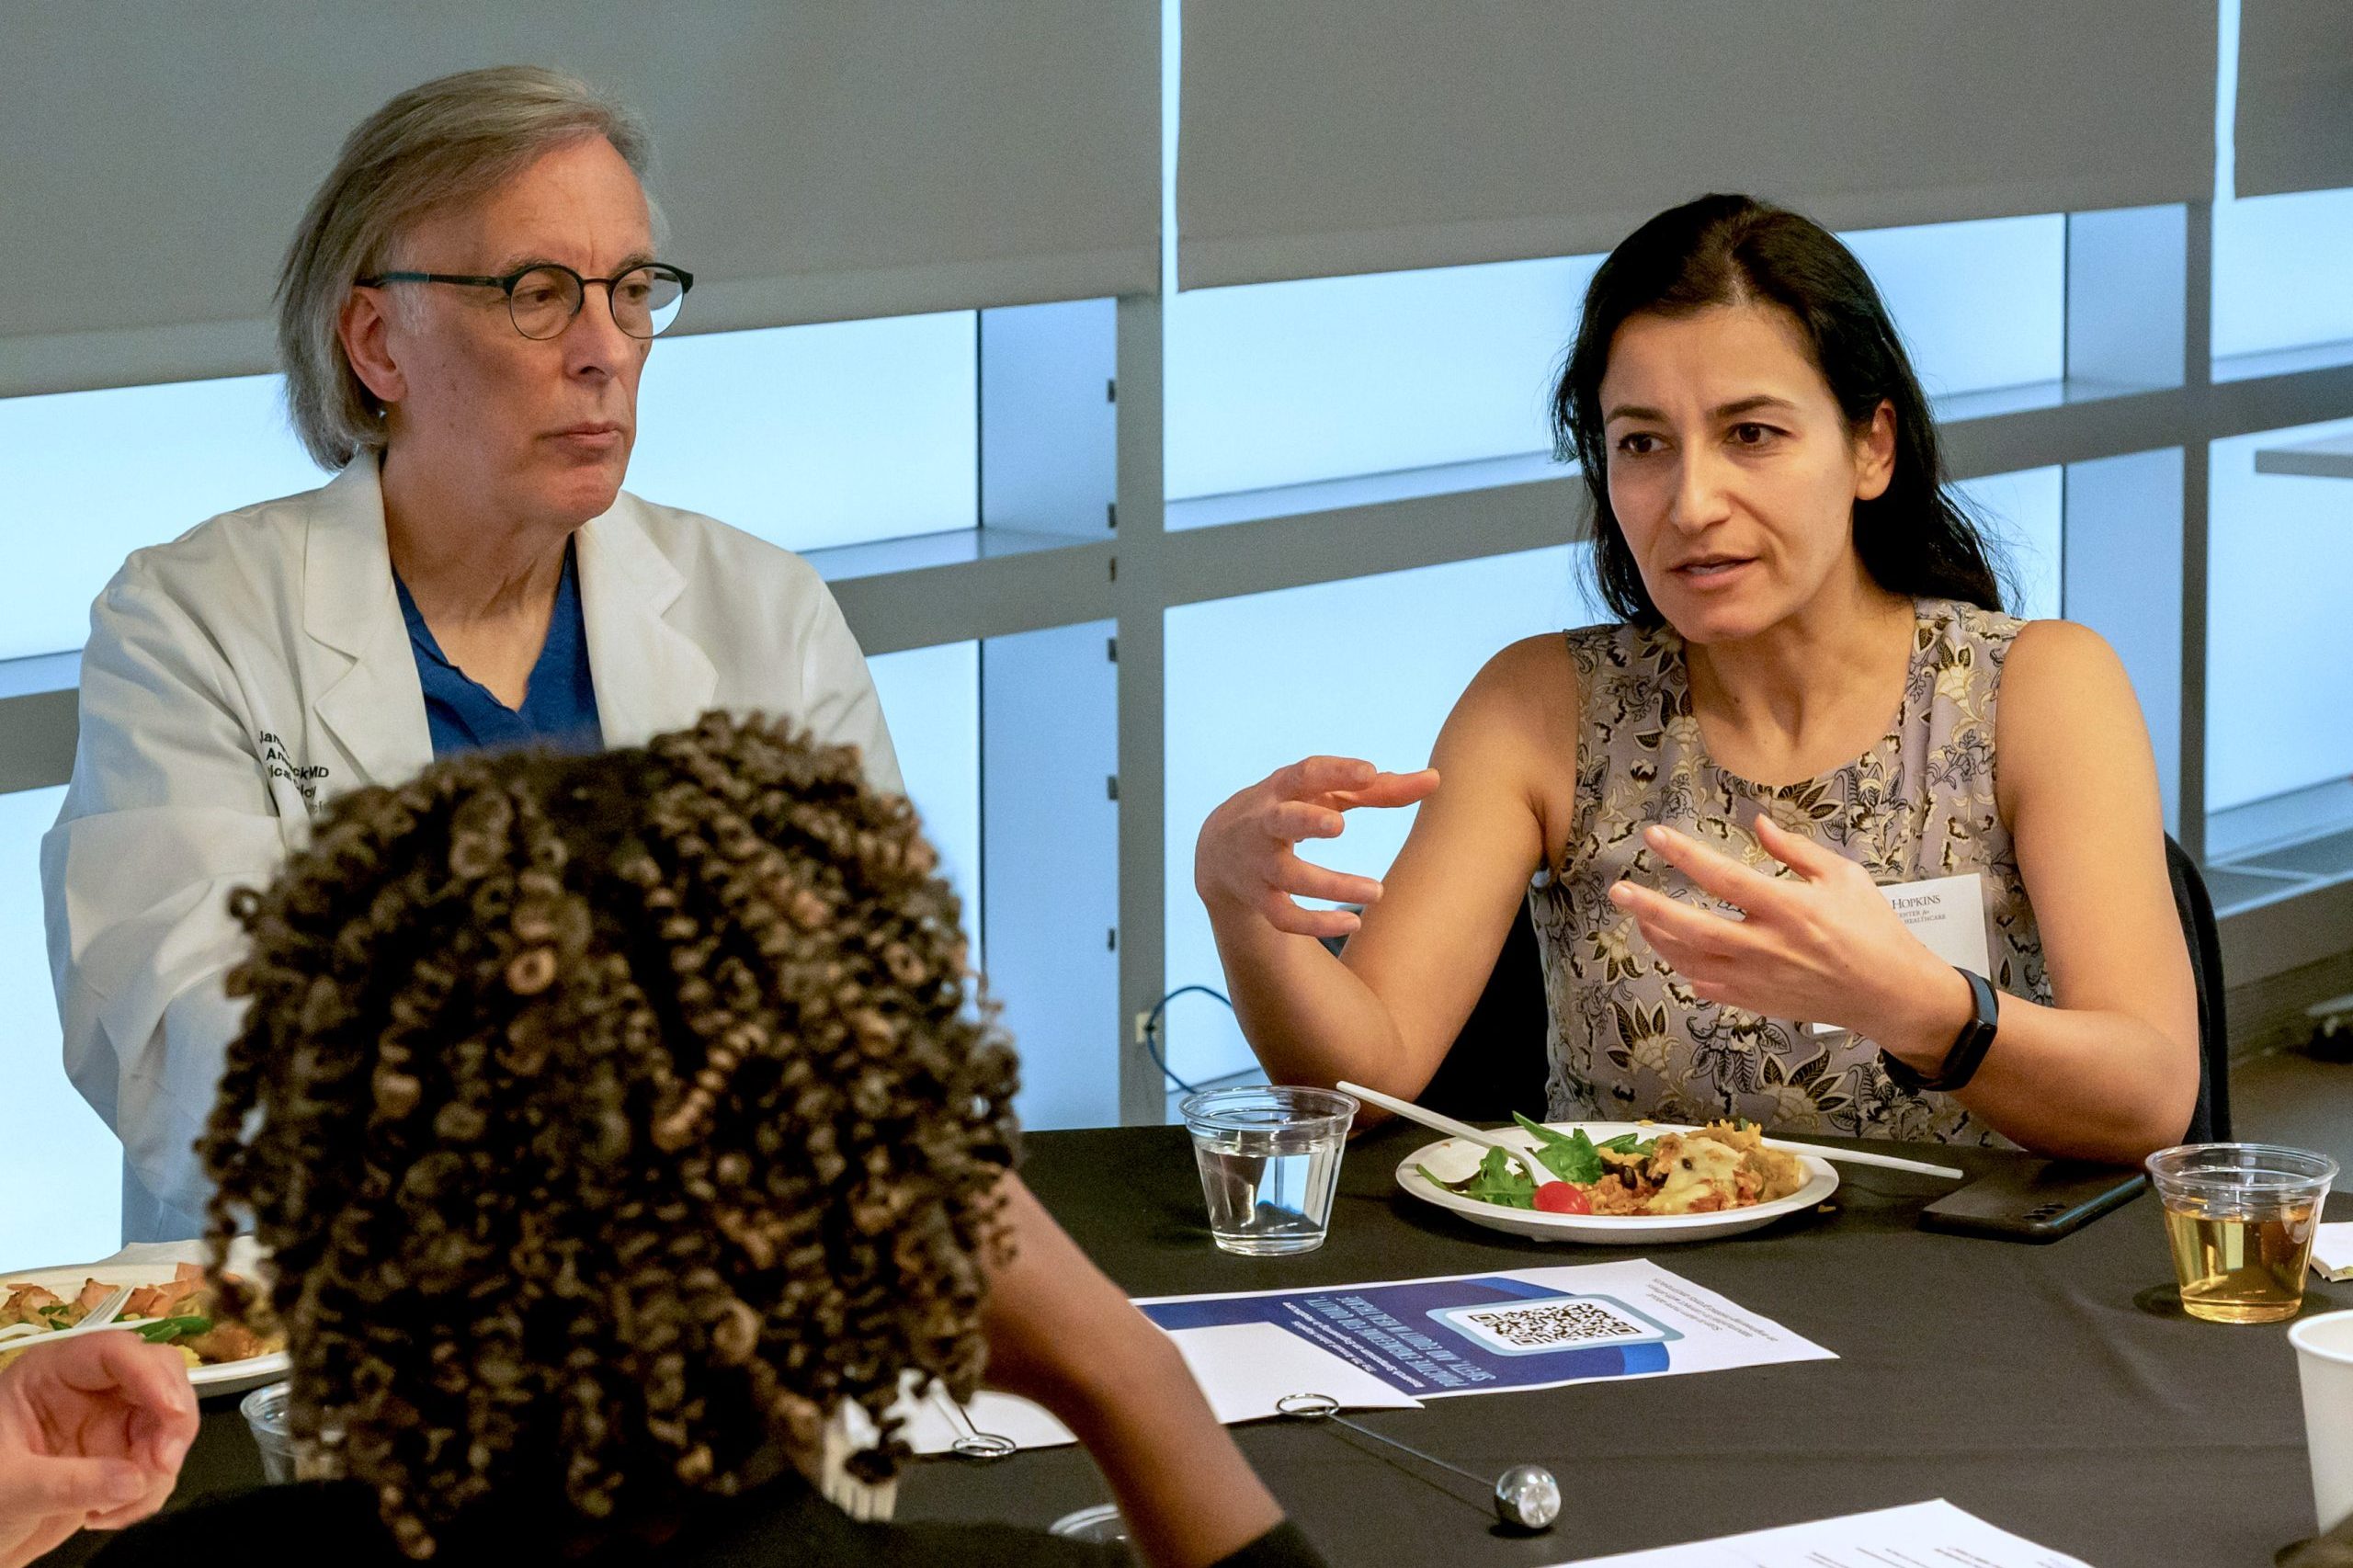 Kimia Ghobadi and other researchers discuss at lunch at the 2023 Johns Hopkins Research Symposium on Engineering in Healthcare.